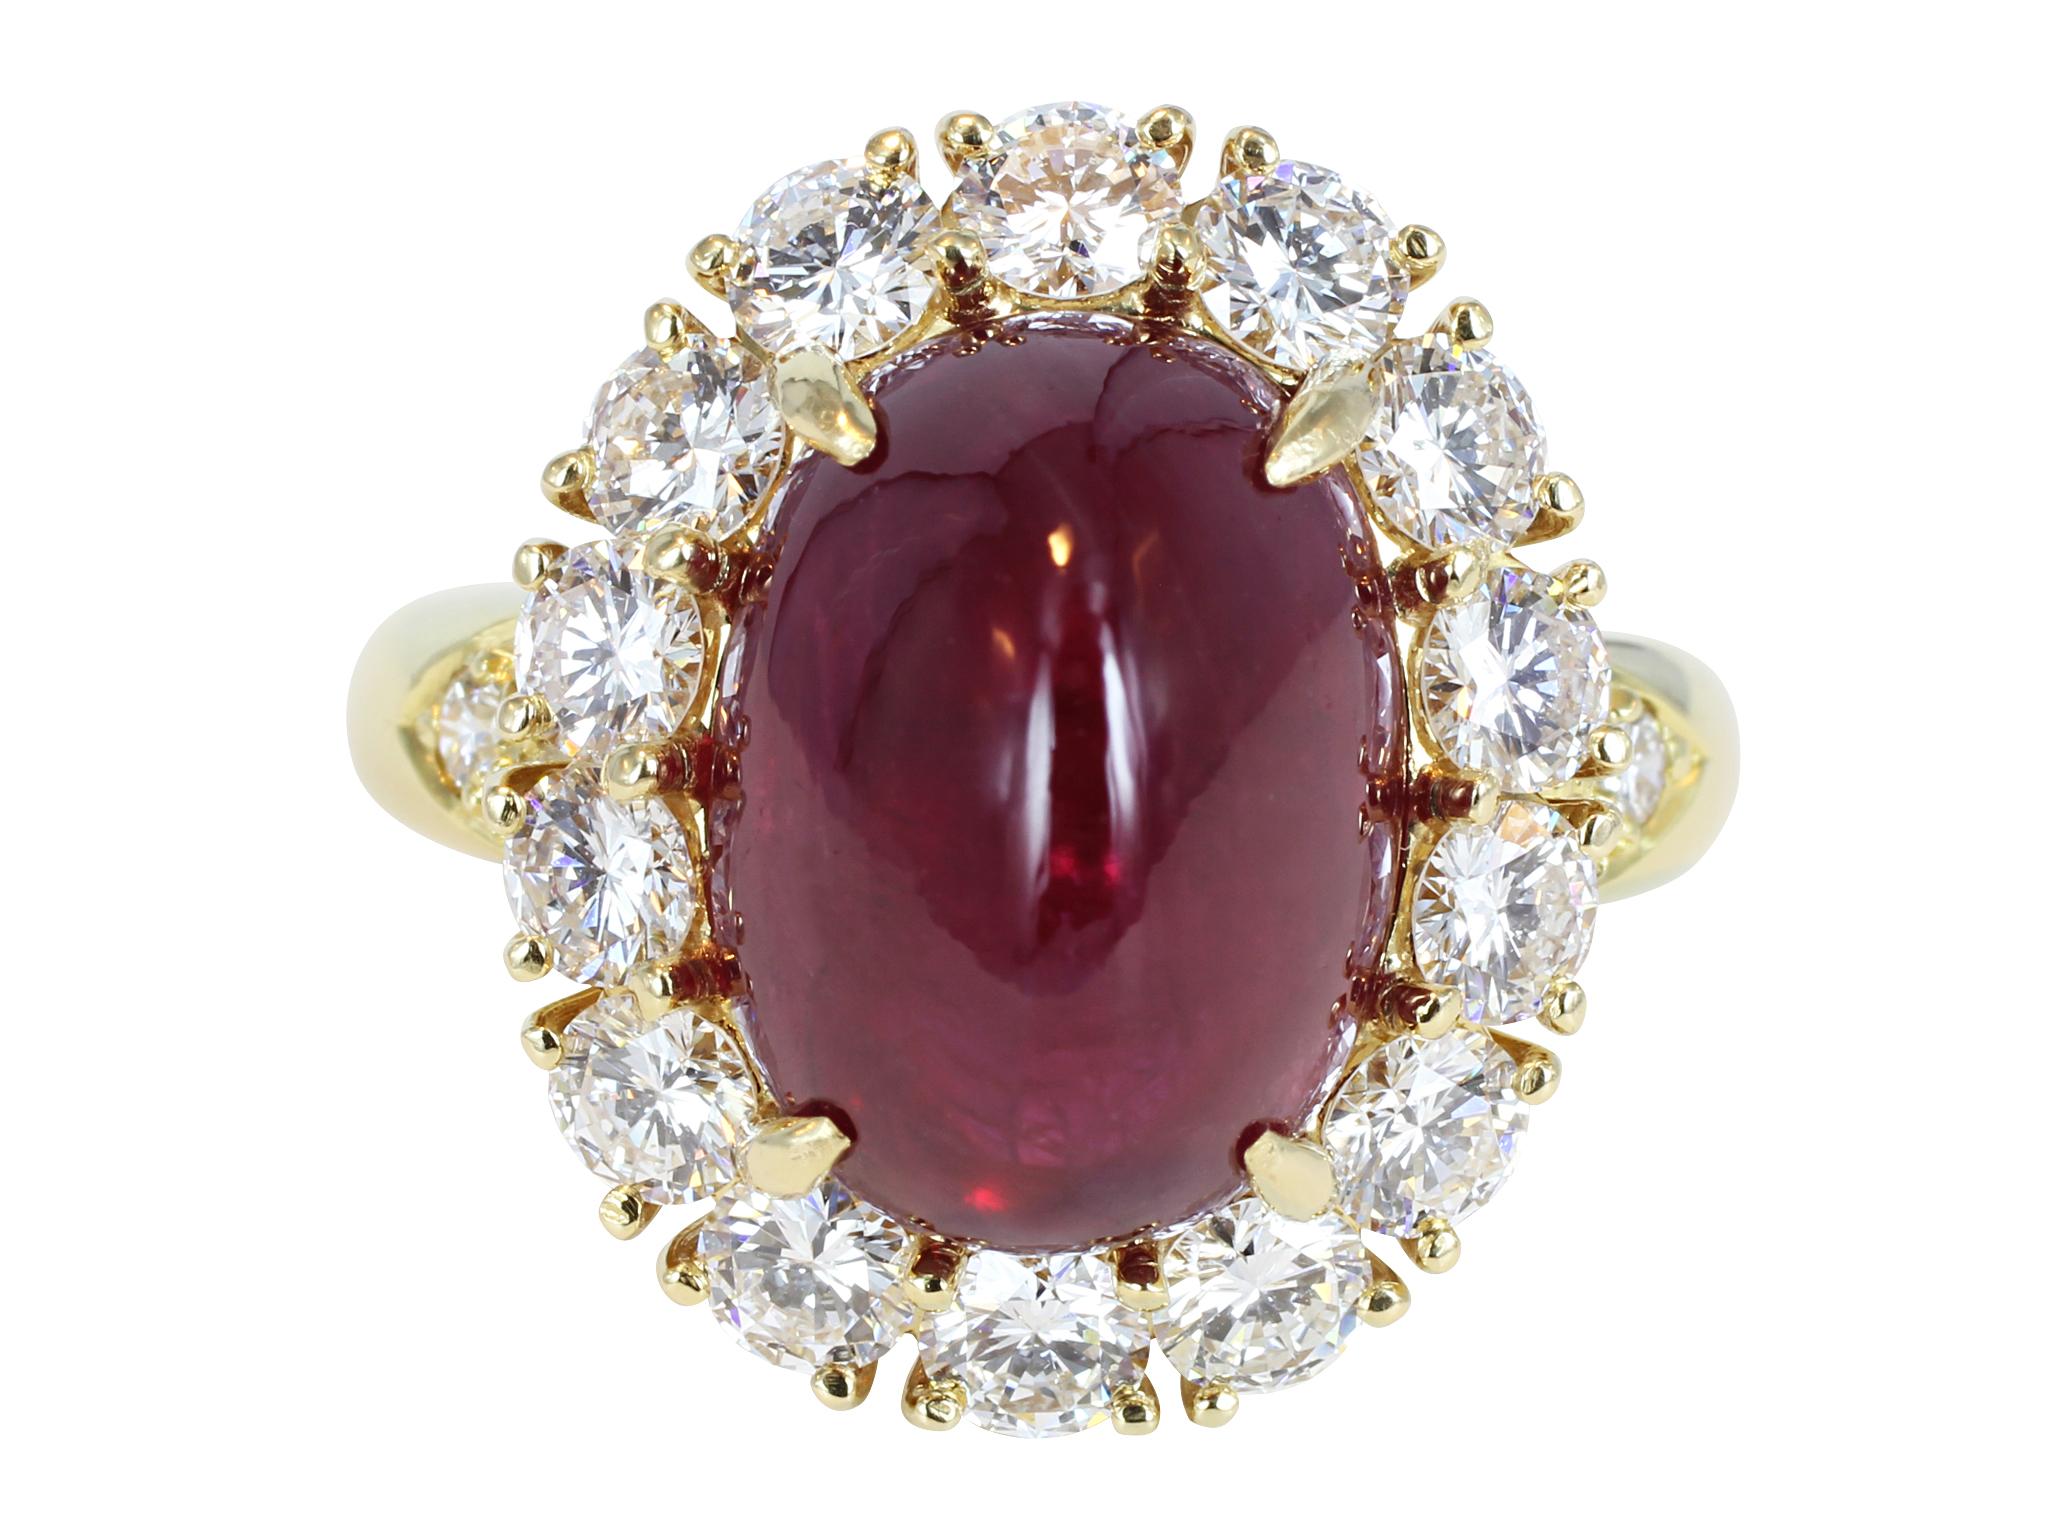  Van Cleef & Arpels 9.42 Carat Cabochon Ruby and Diamond Cluster Ring In Excellent Condition For Sale In Chestnut Hill, MA